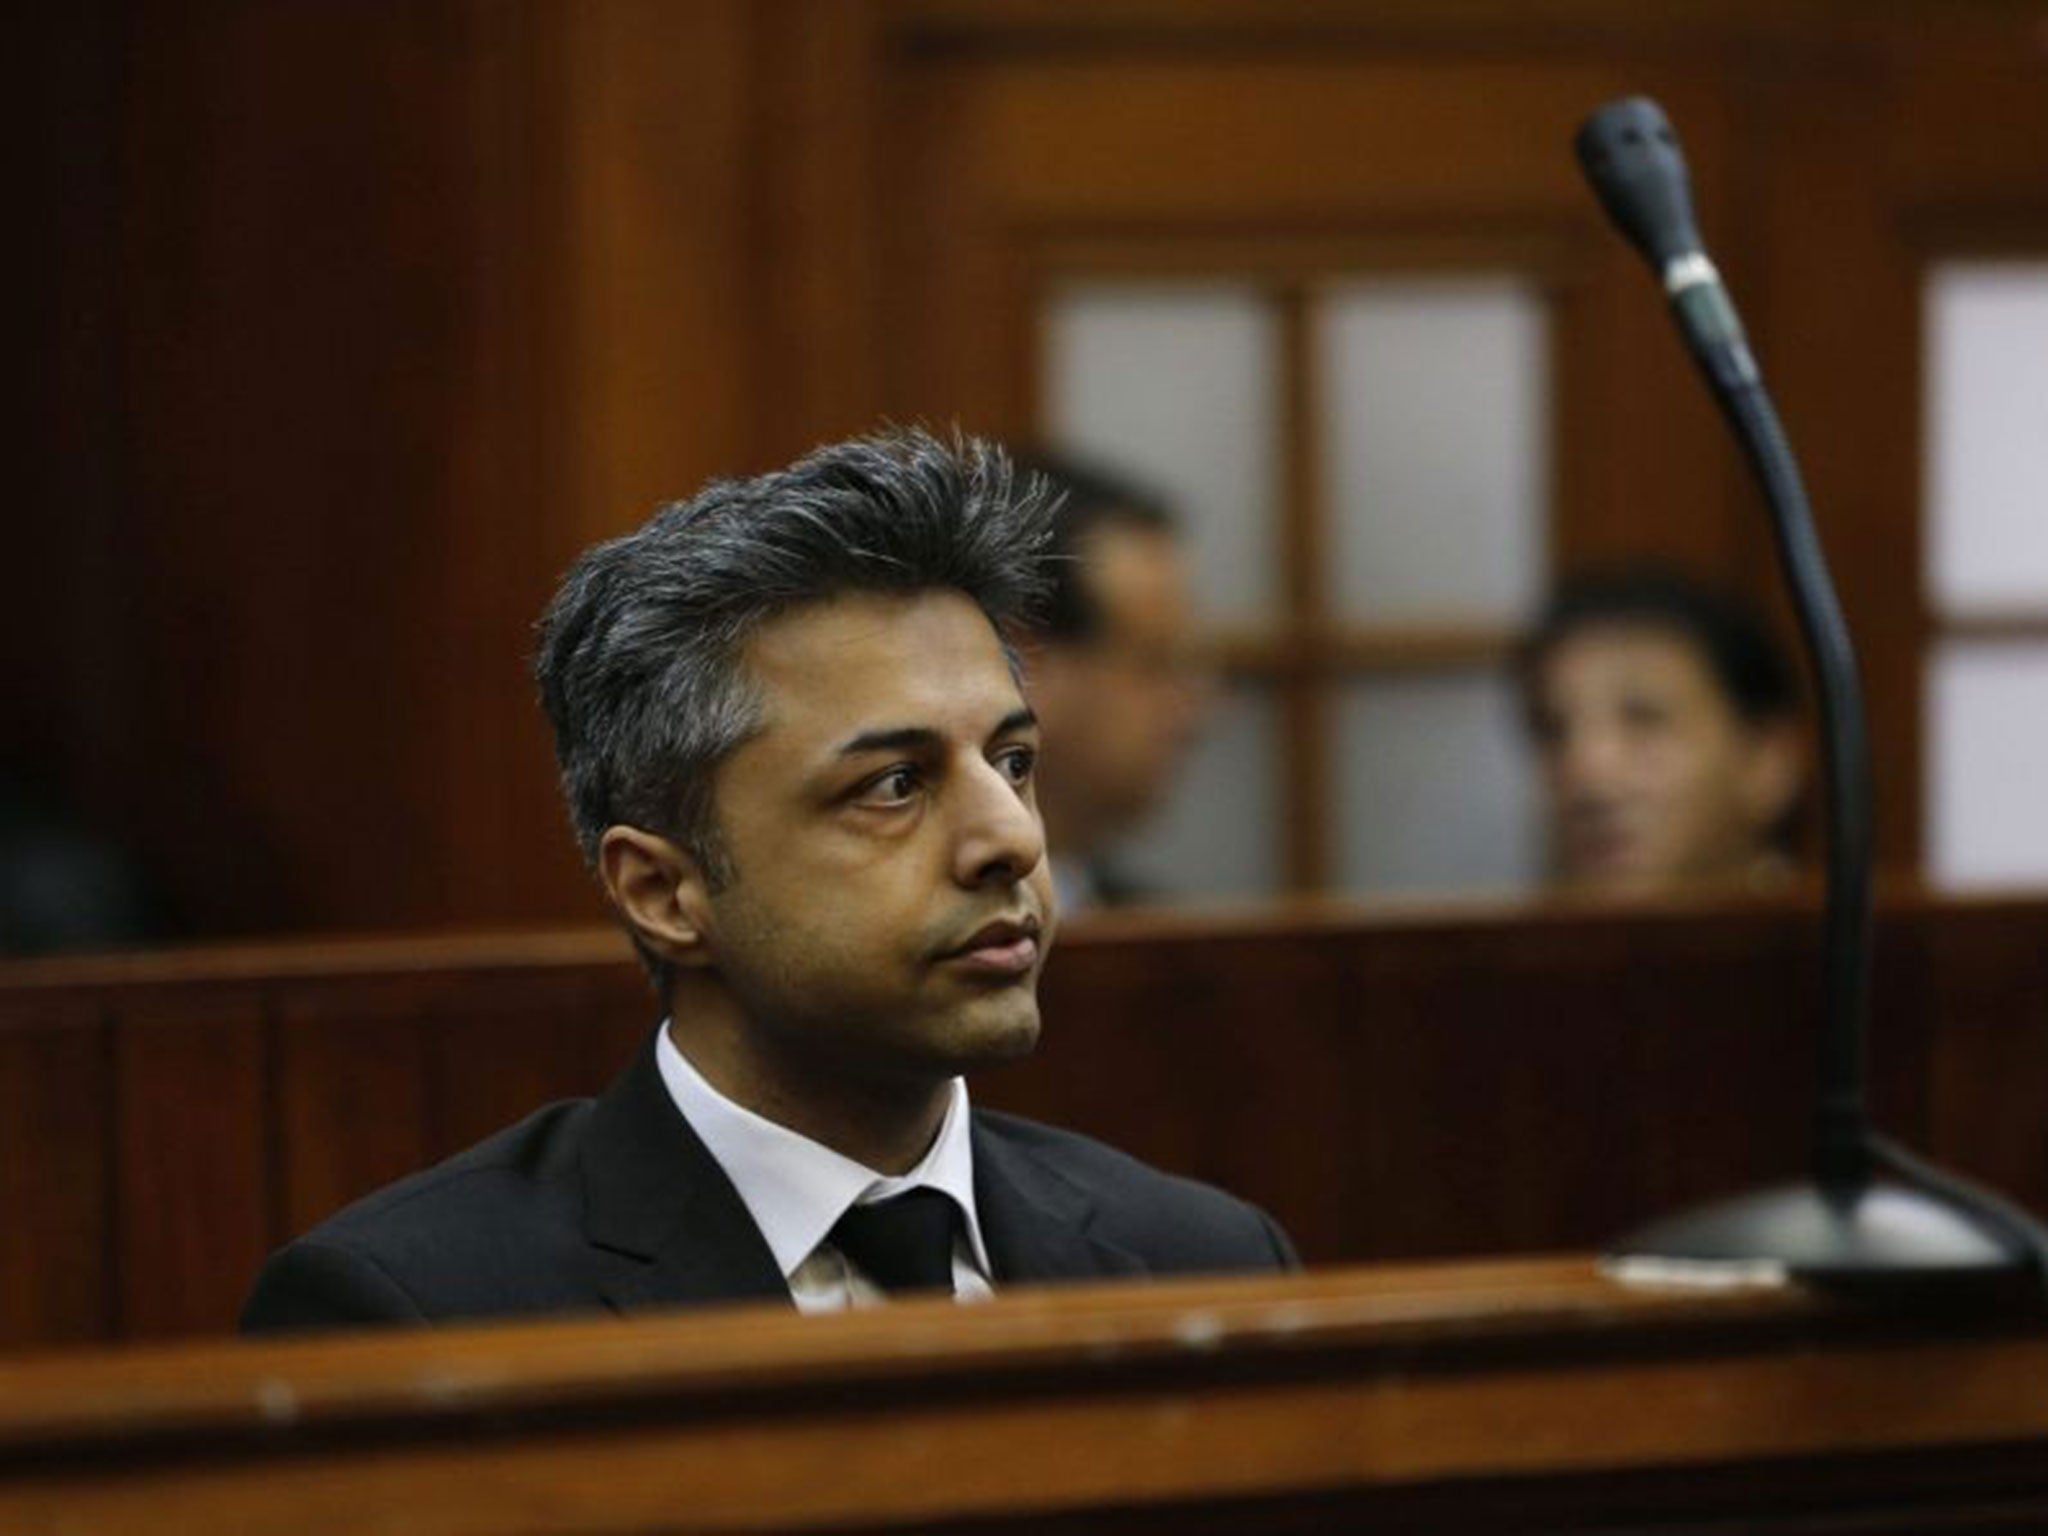 Shrien Dewani sits in the dock before the start of his trial at the Western Cape High Court, Cape Town